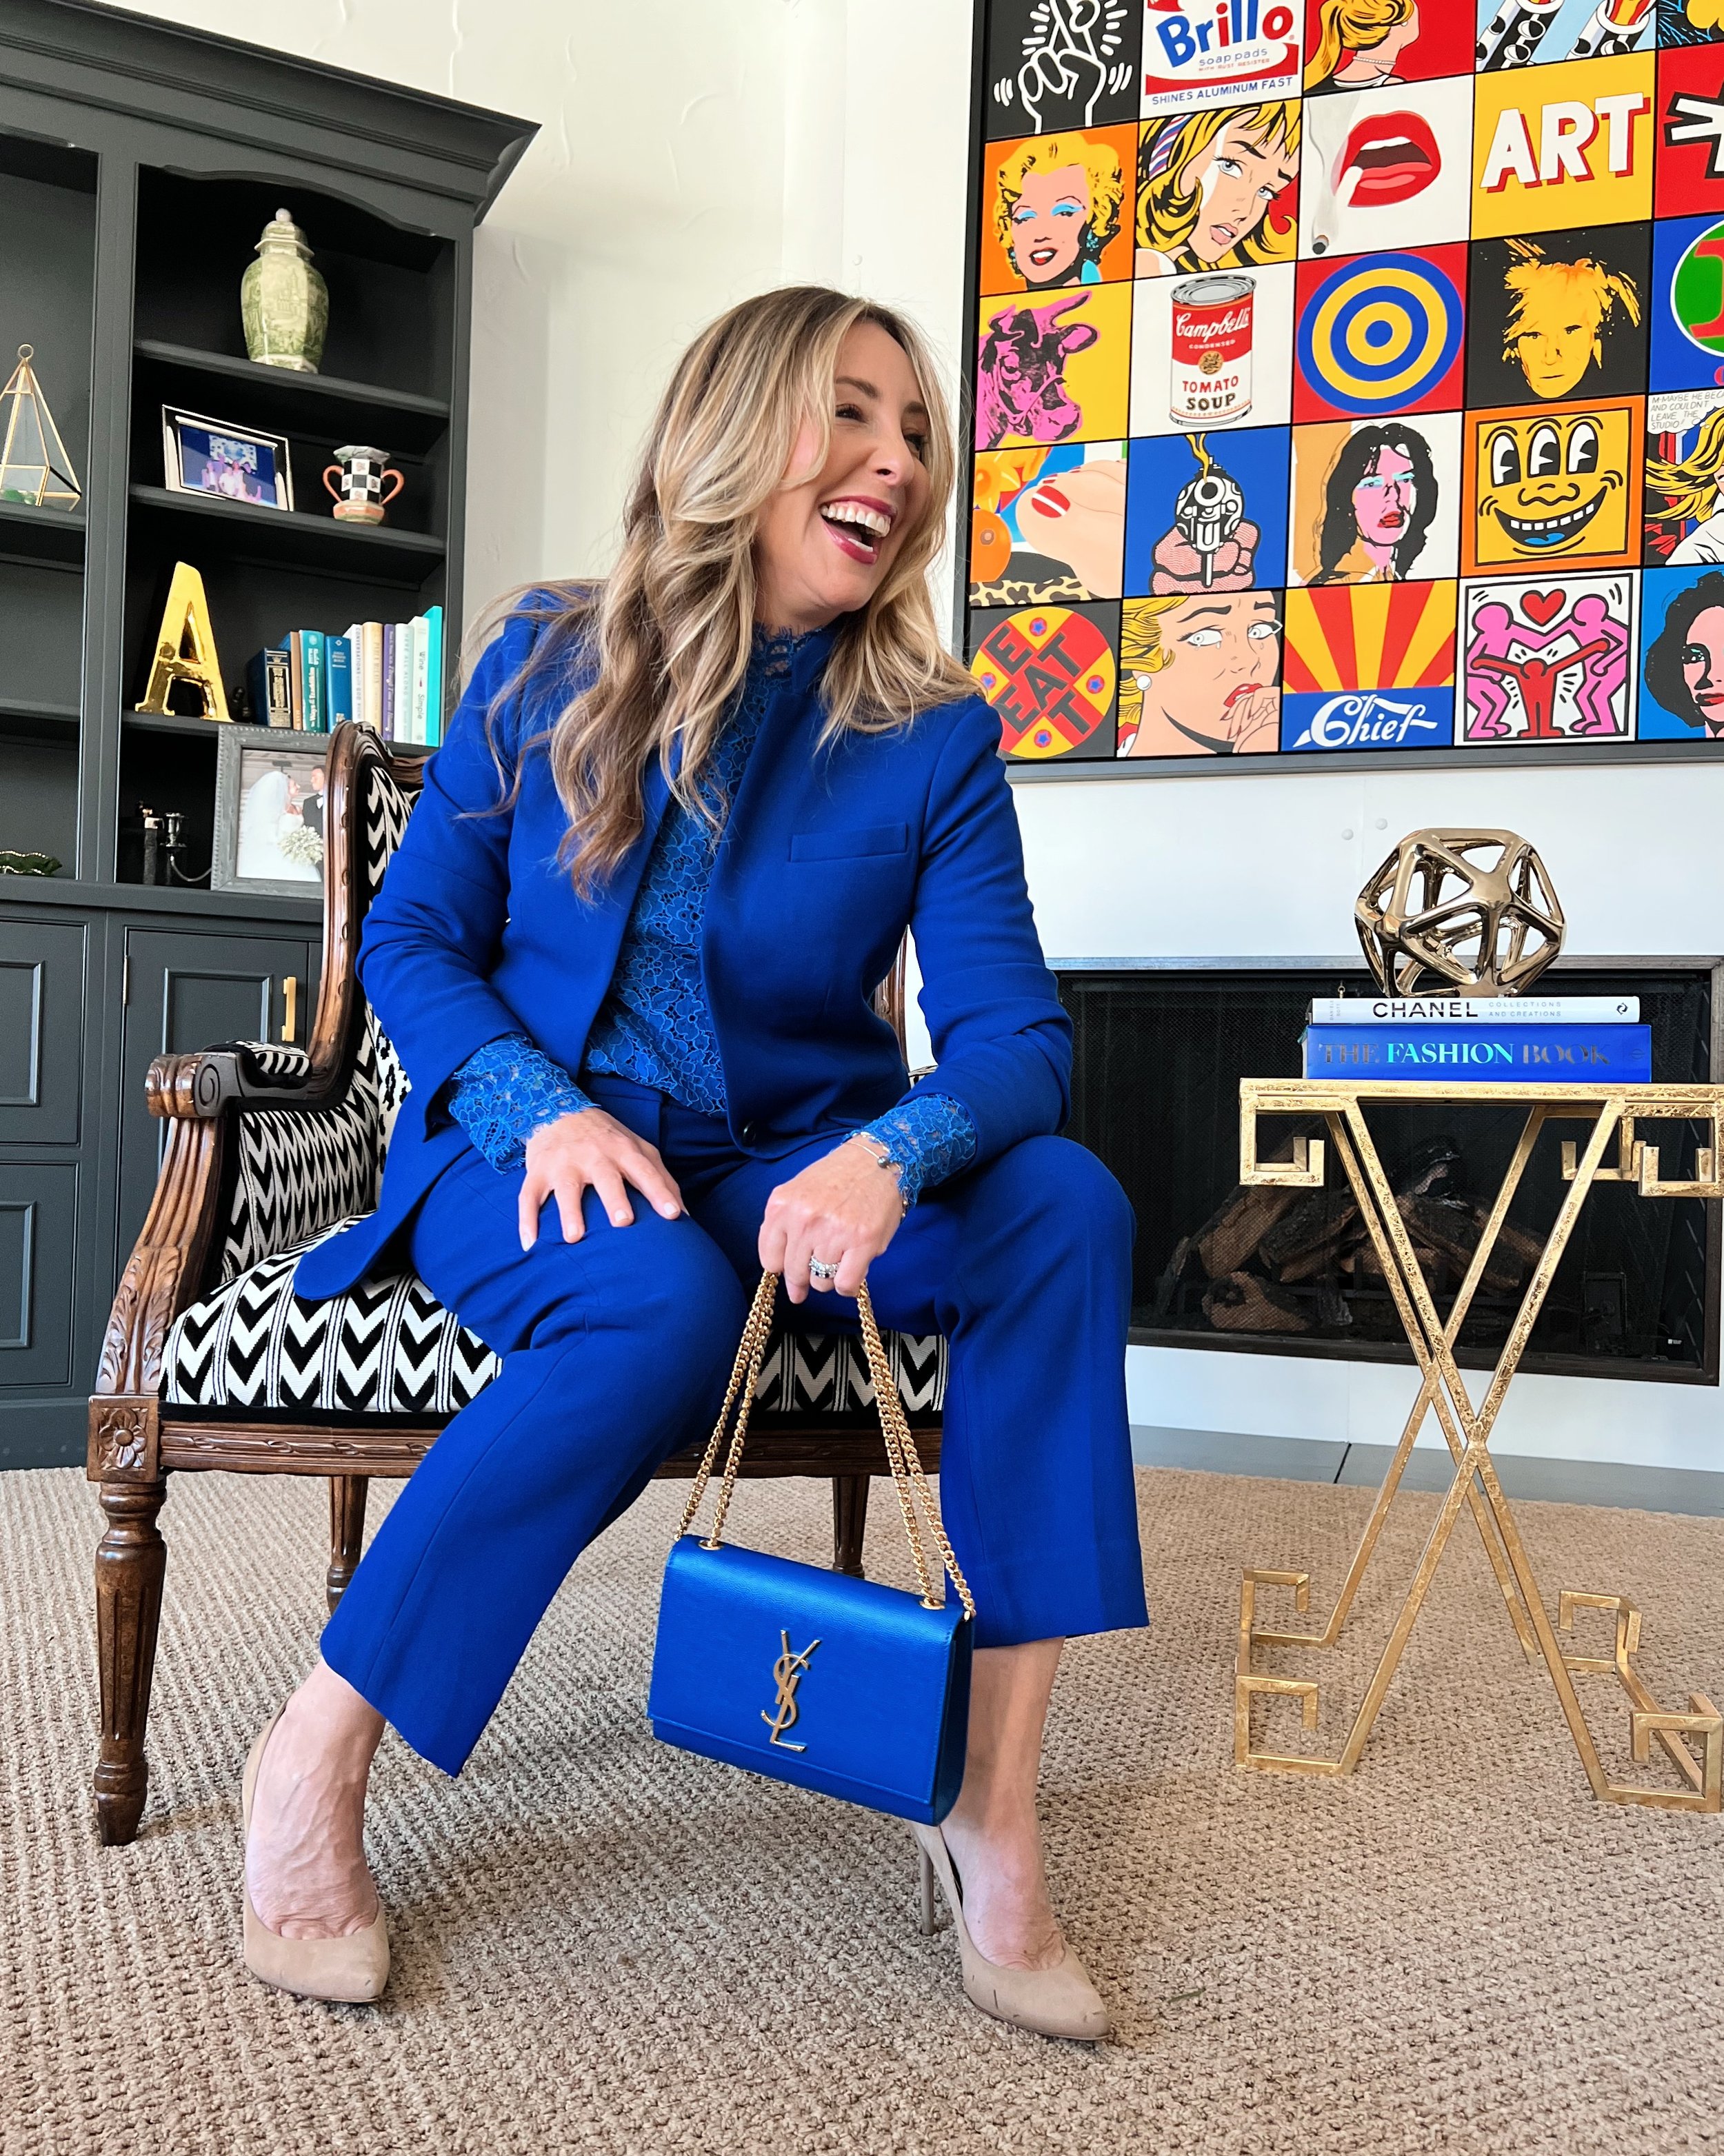 Cobalt Blue: How To Wear The Color That Looks Fabulous on